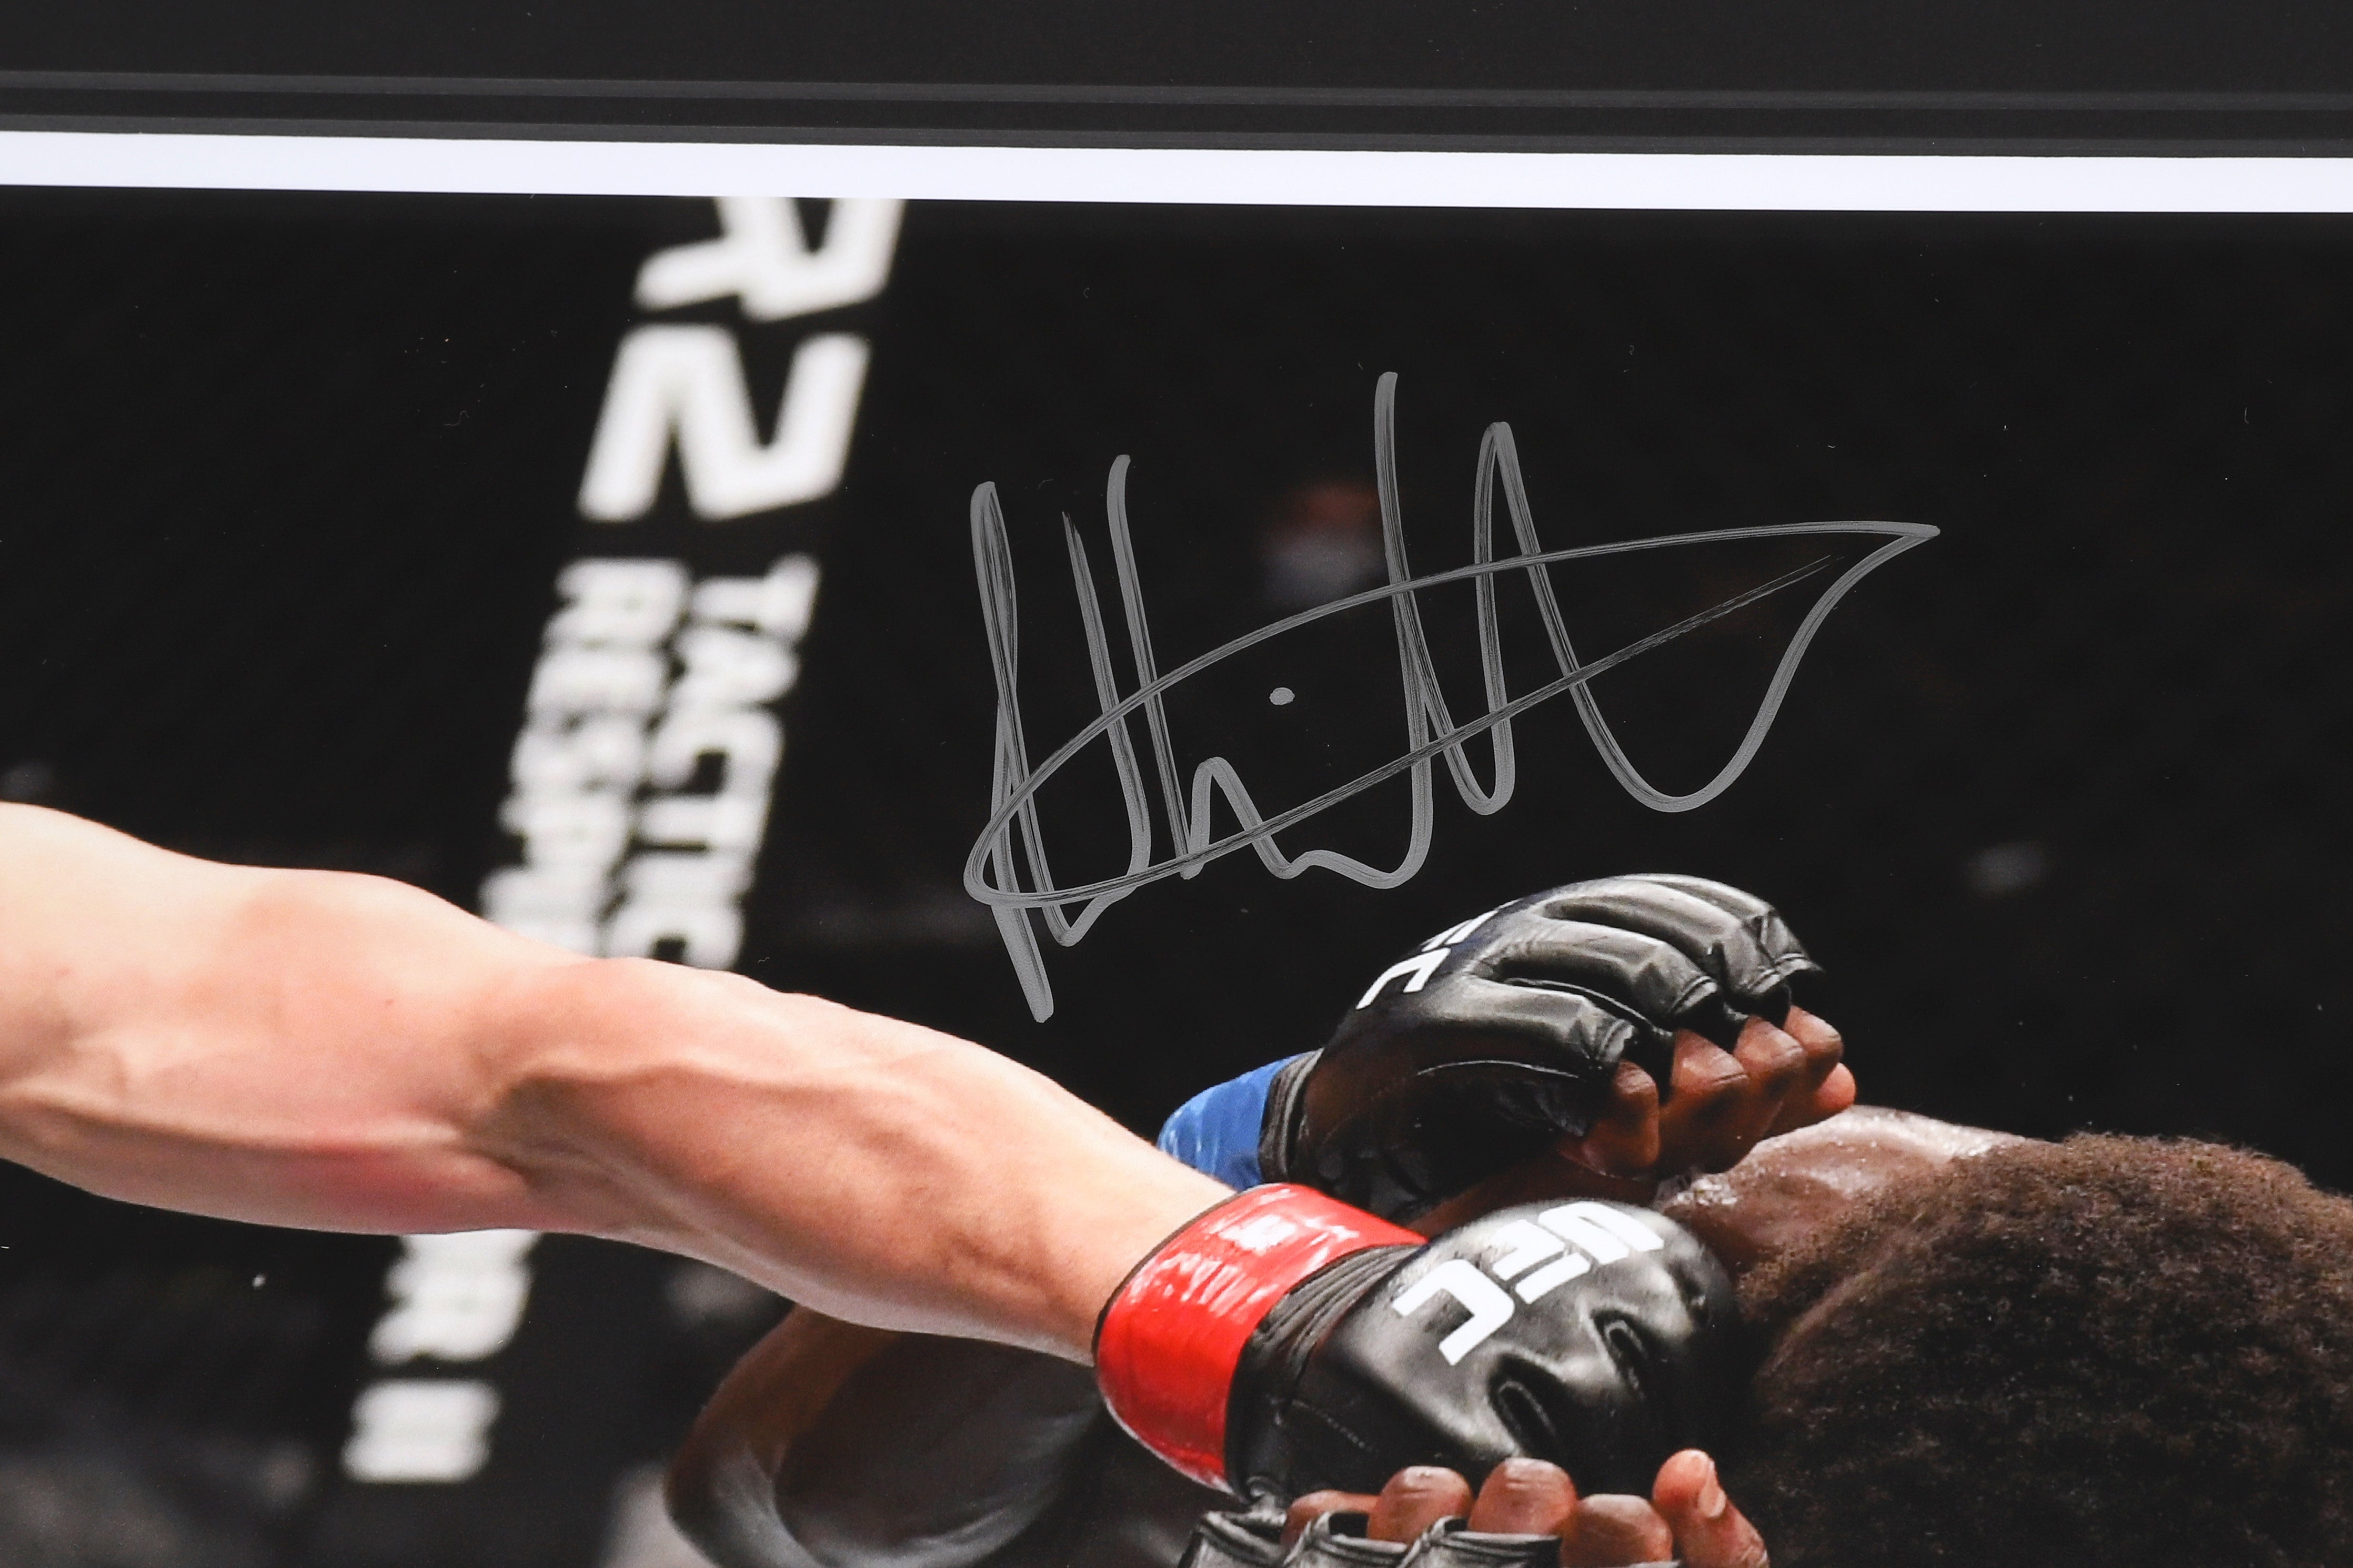 Robert Whittaker Signed Photo UFC 254 - Whittaker Punches Cannonier